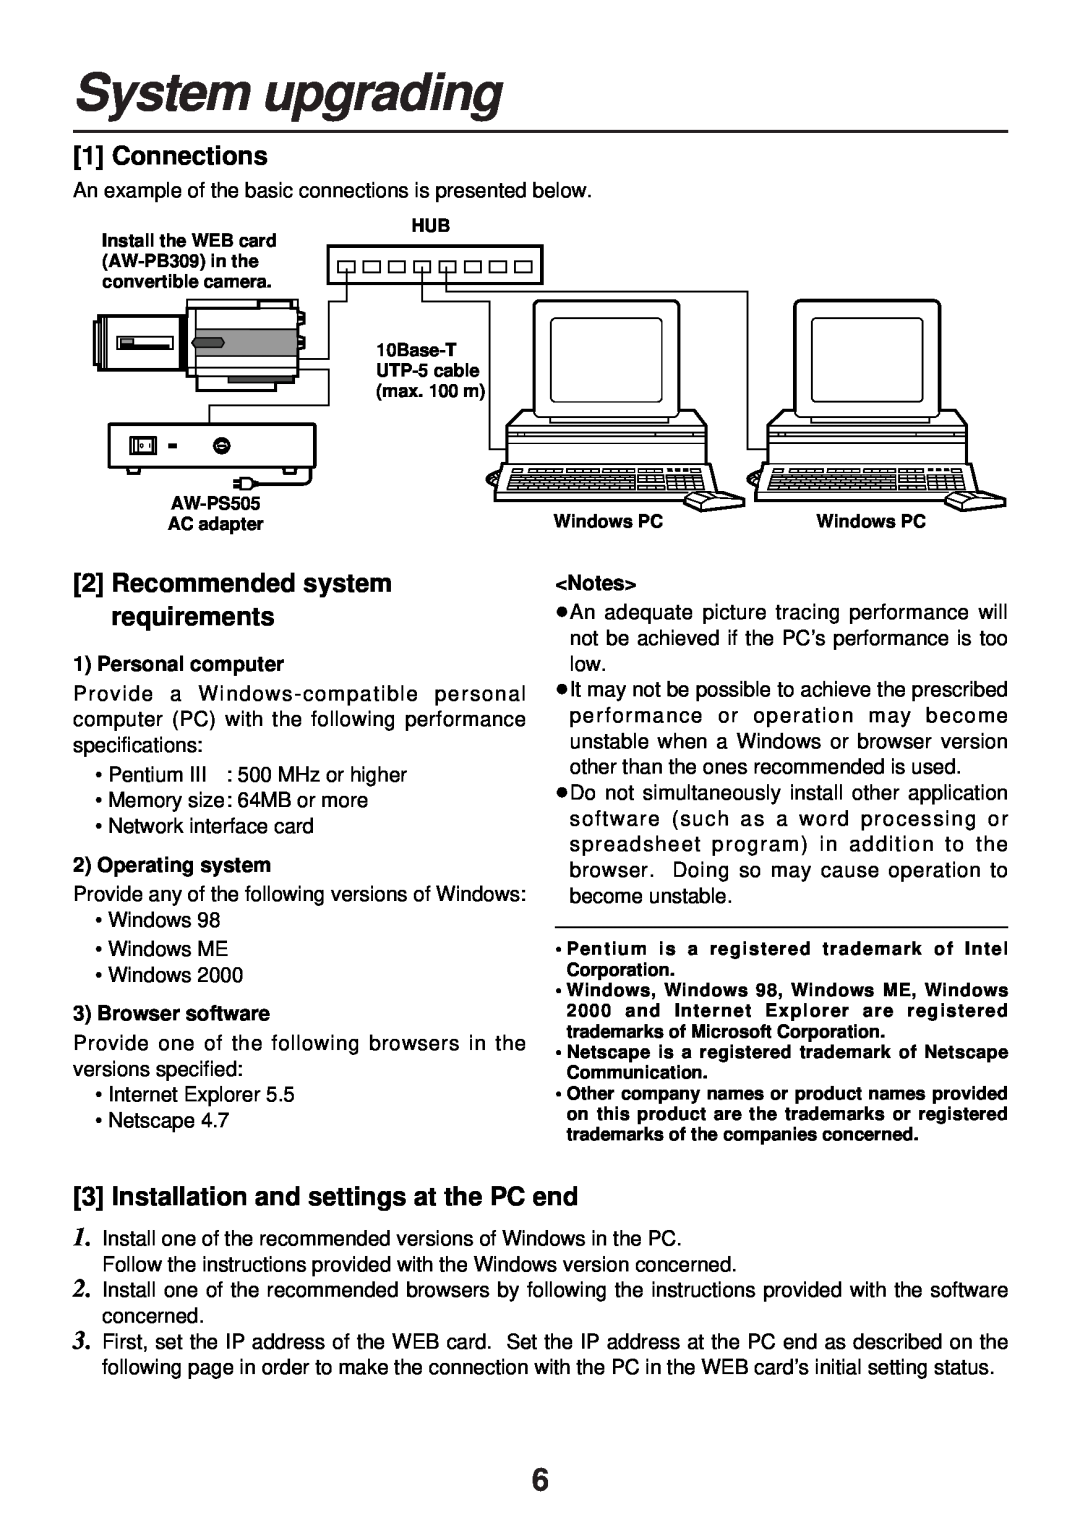 Panasonic AW-PB309P System upgrading, Connections, Recommended system requirements, Personal computer, Operating system 